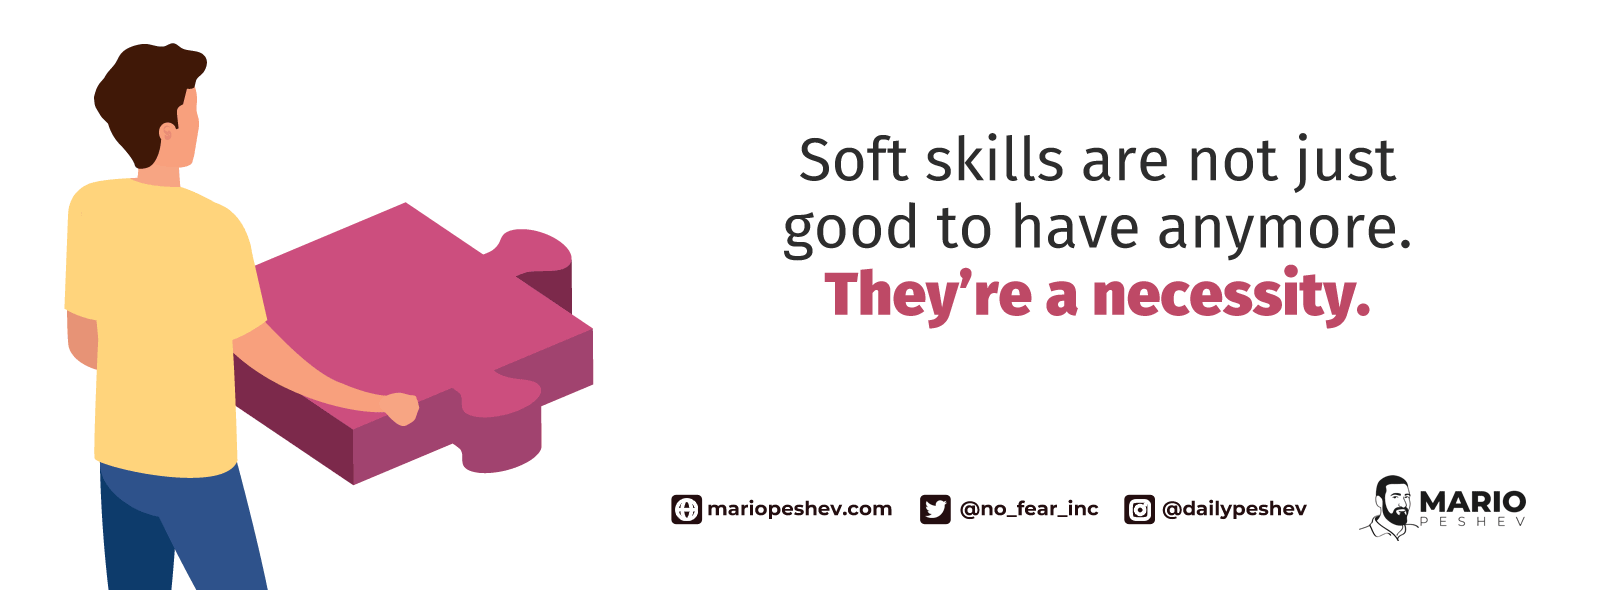 Soft skills are not just good to have anymore. They are a necessity.